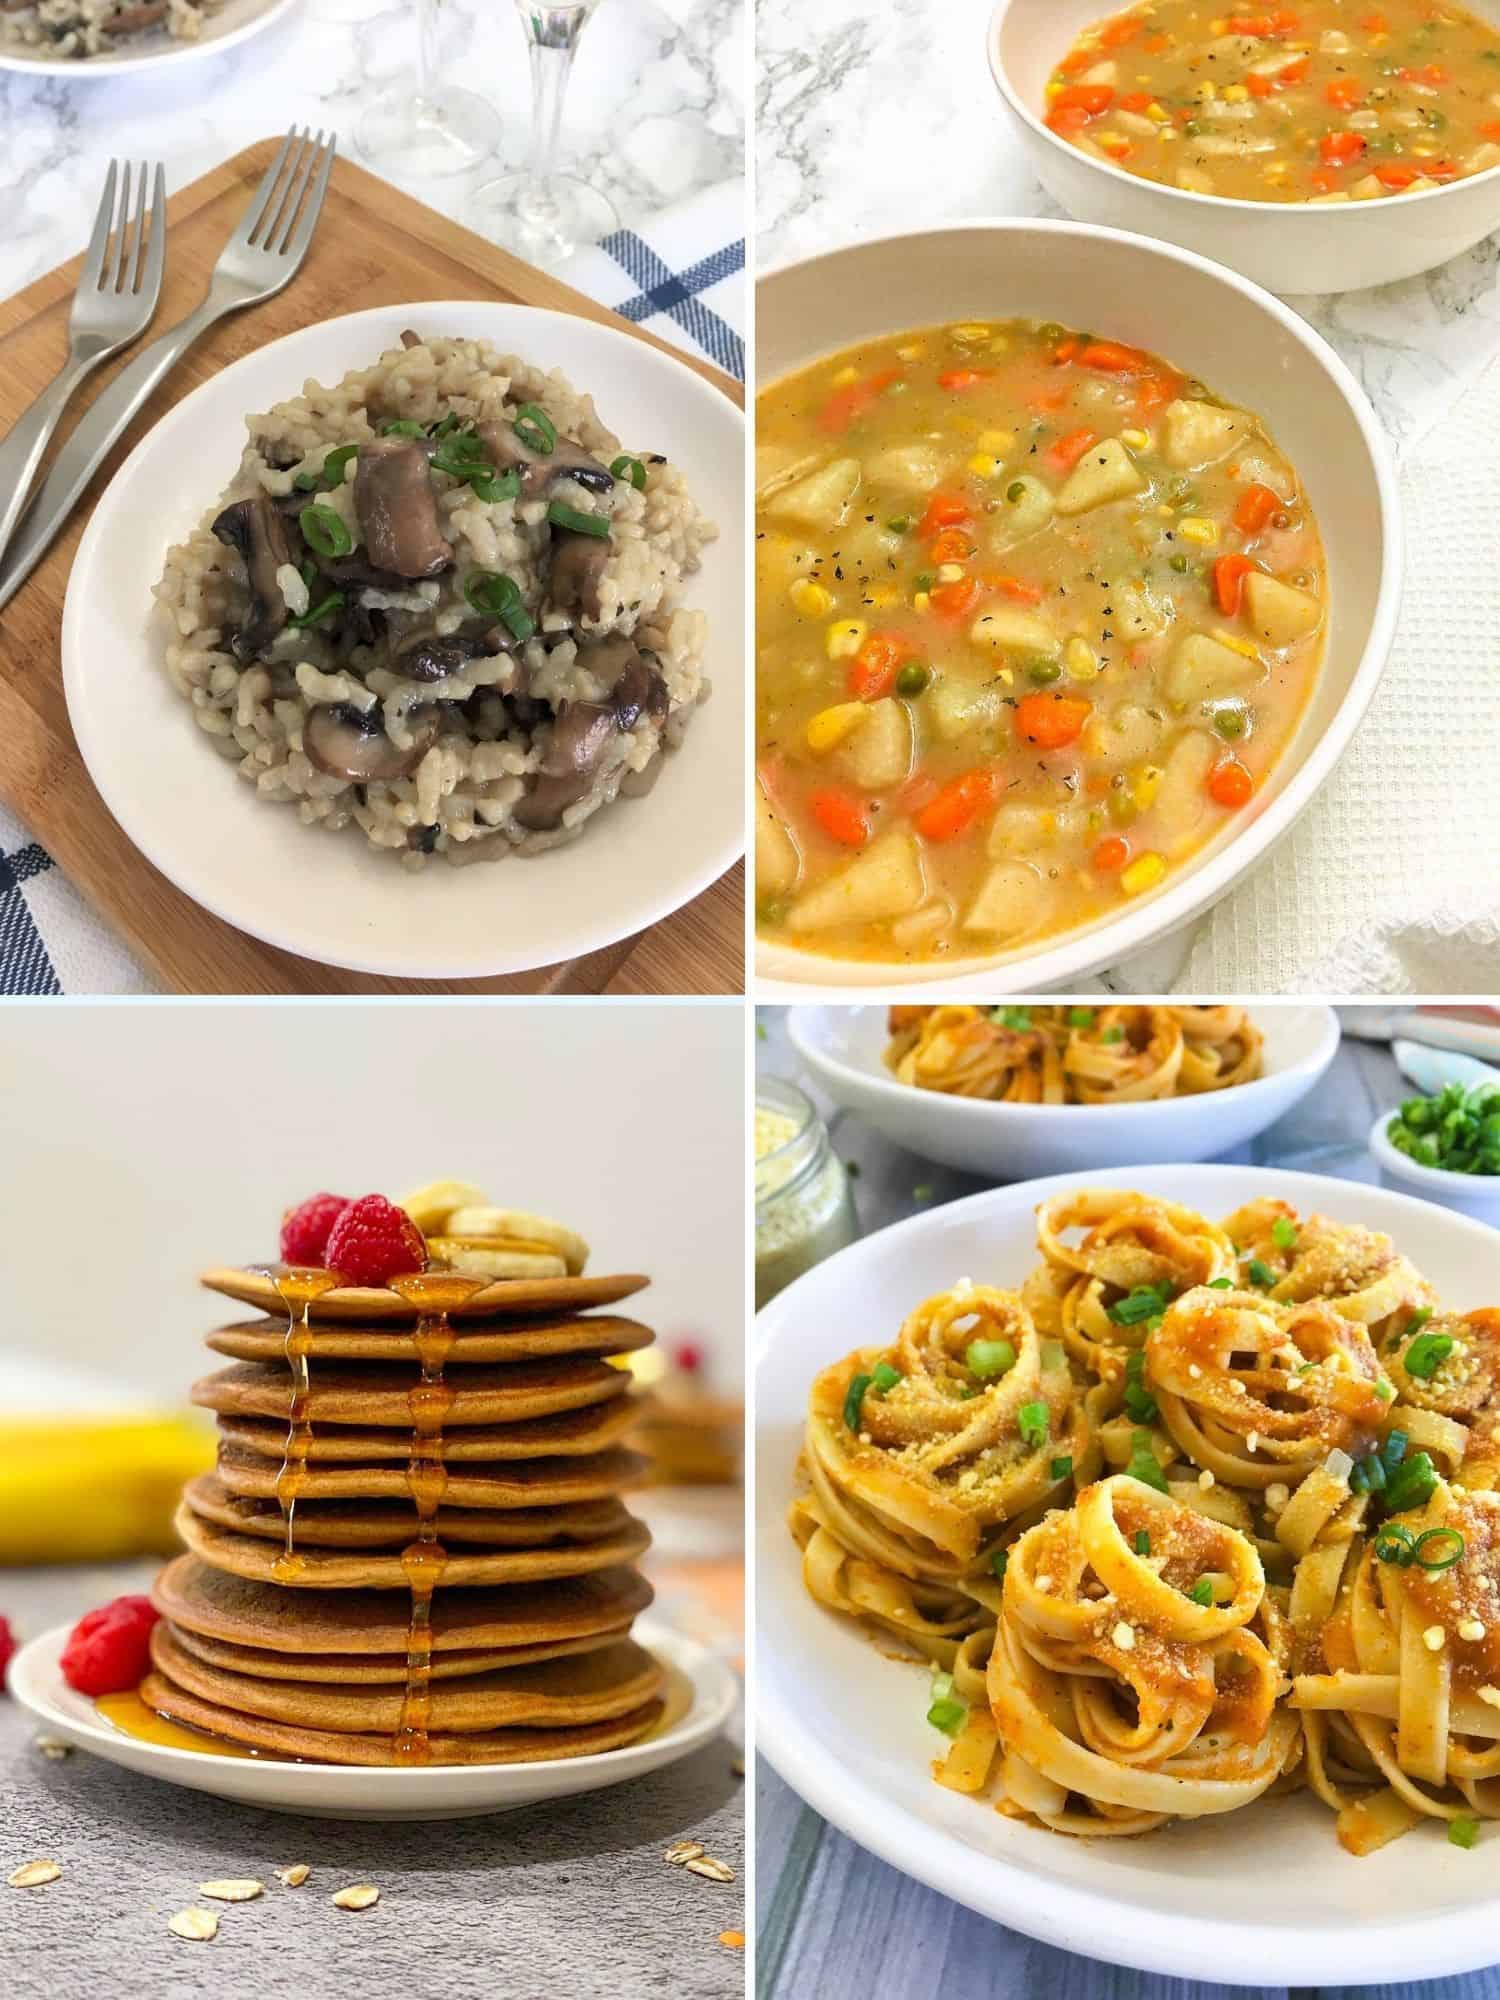 Collage of 4 food images: rice, soup, pancakes, pasta.